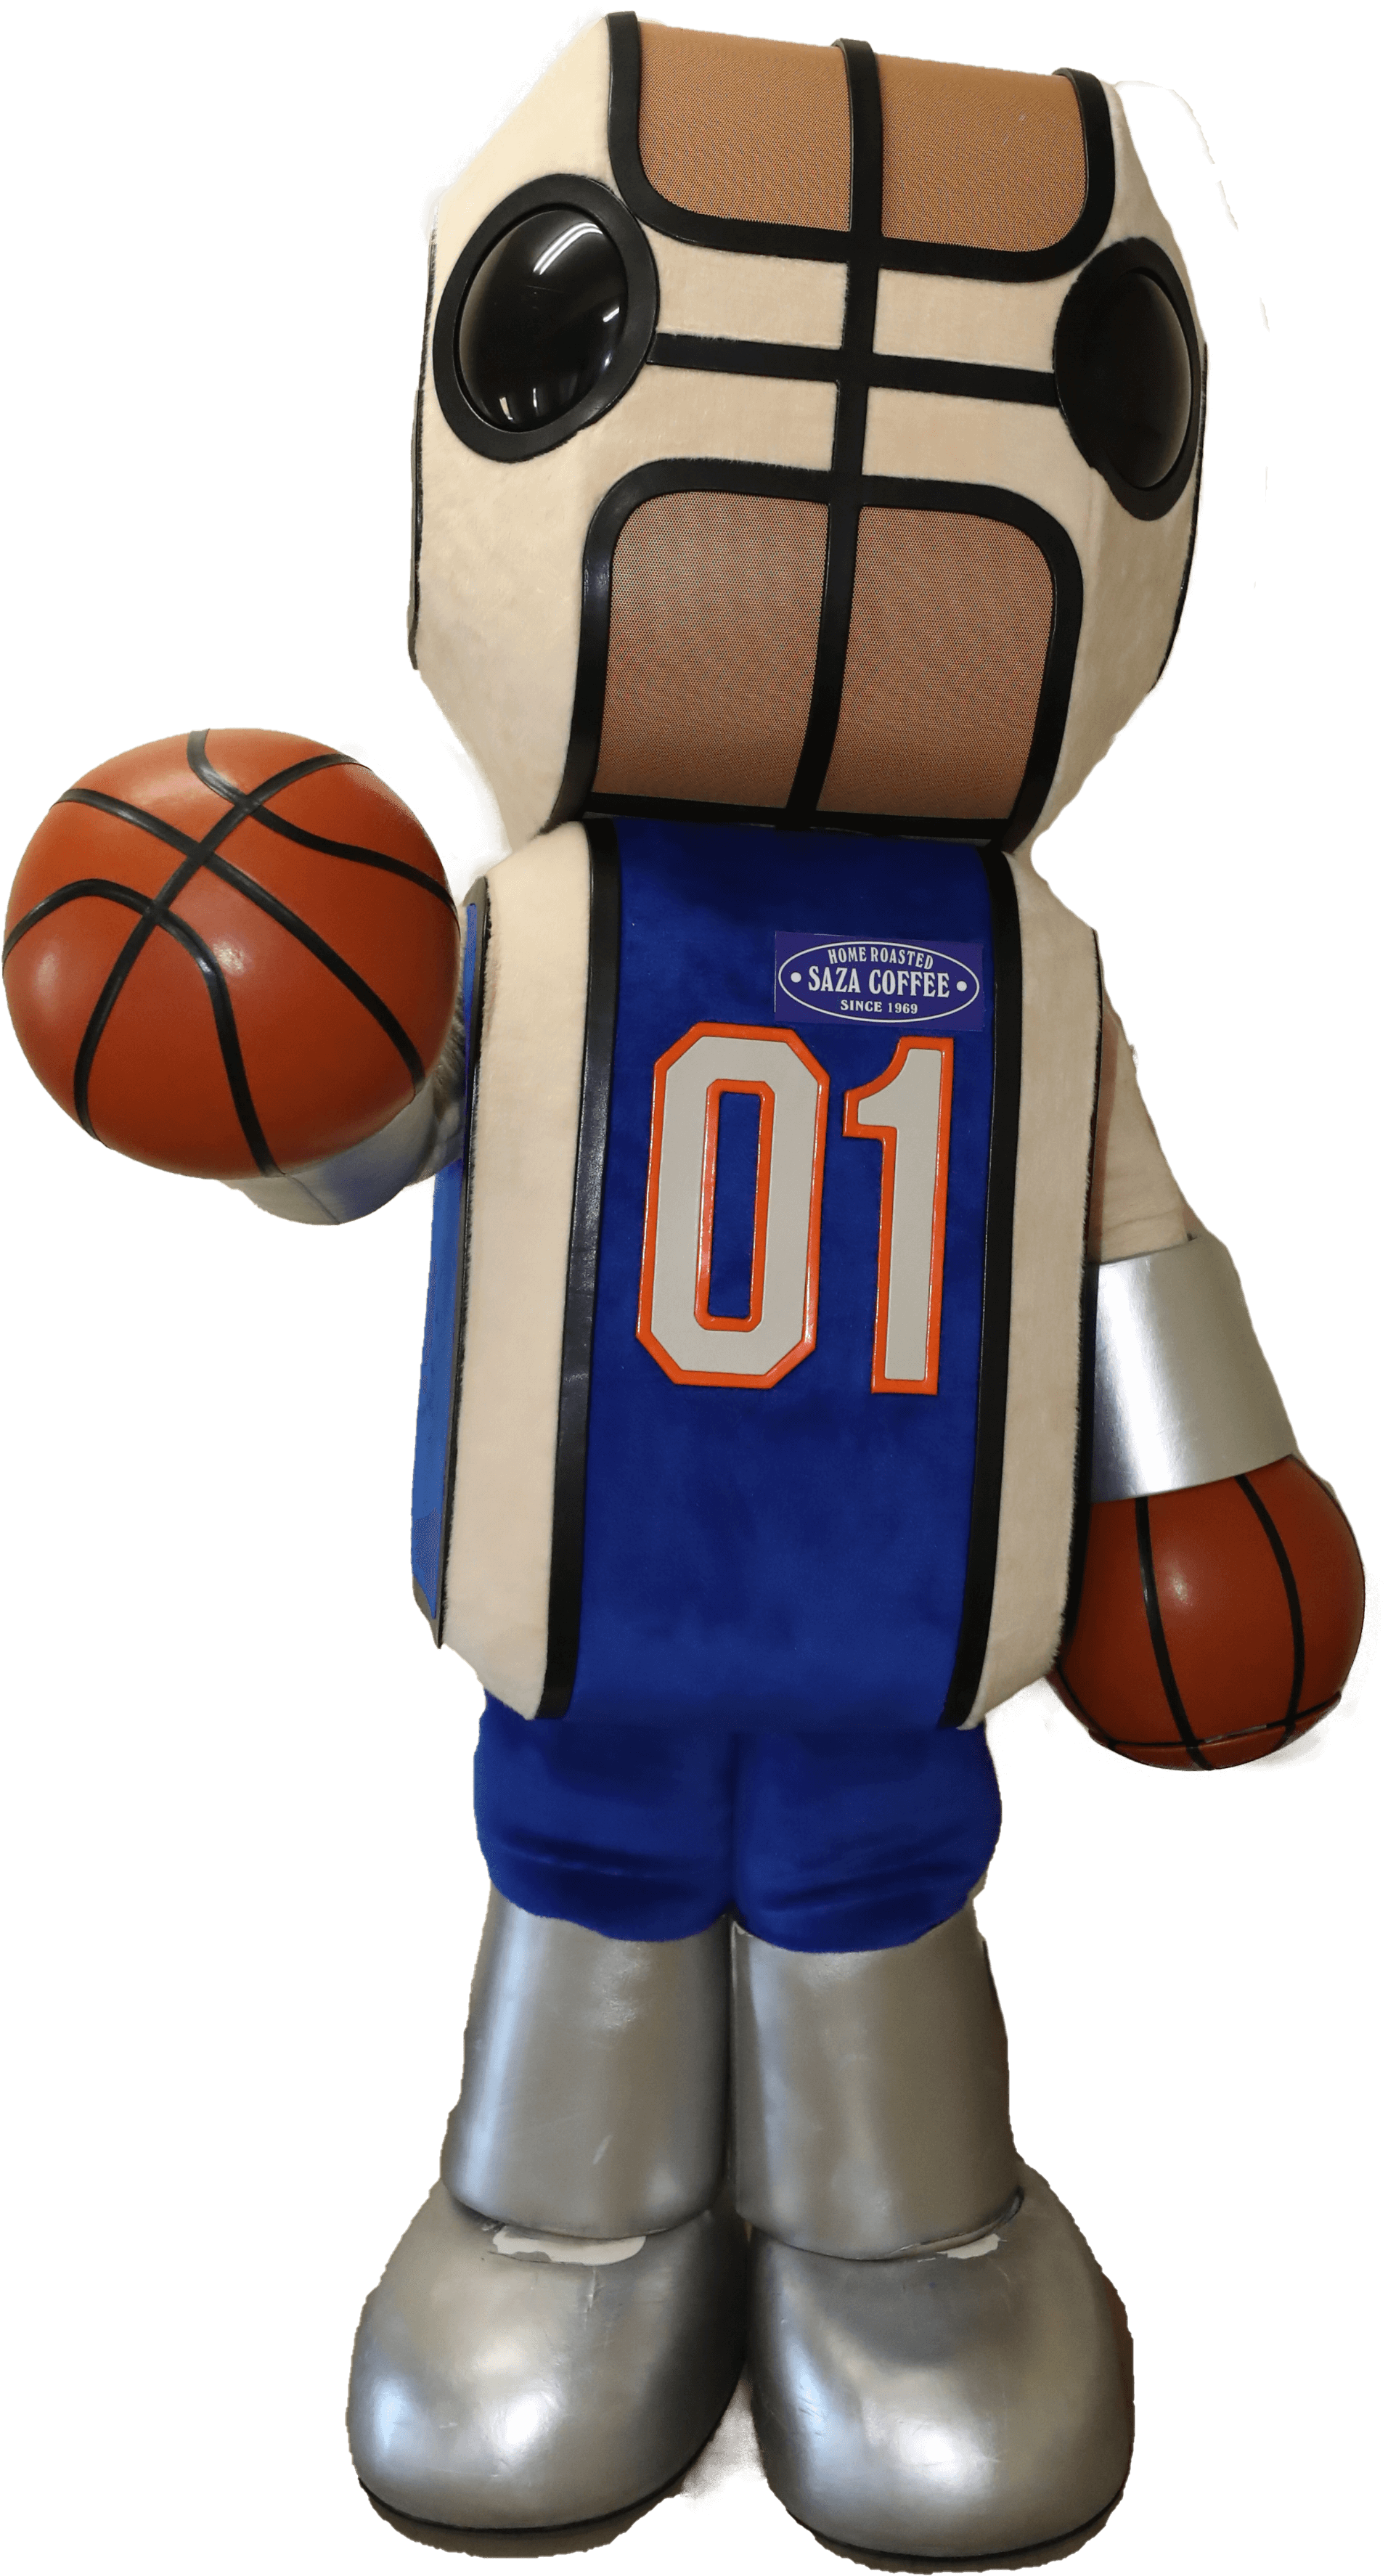 B League Mascot Of The Year マスコット総選挙